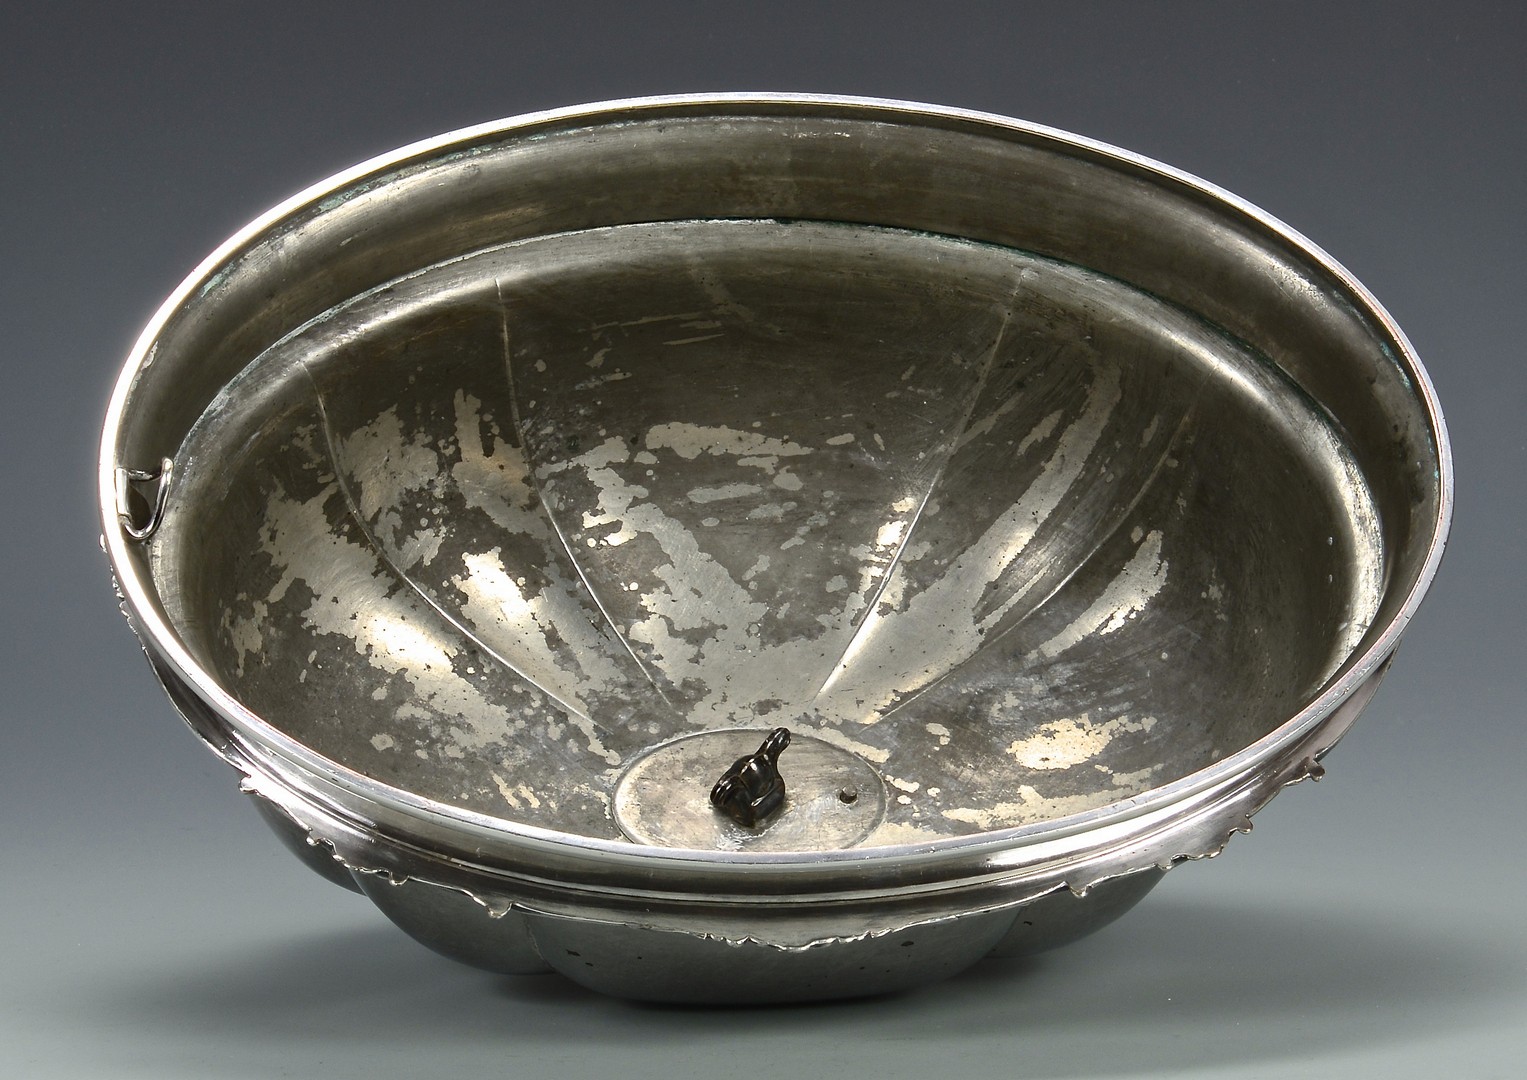 Lot 833: Two William IV Plated Serving Items